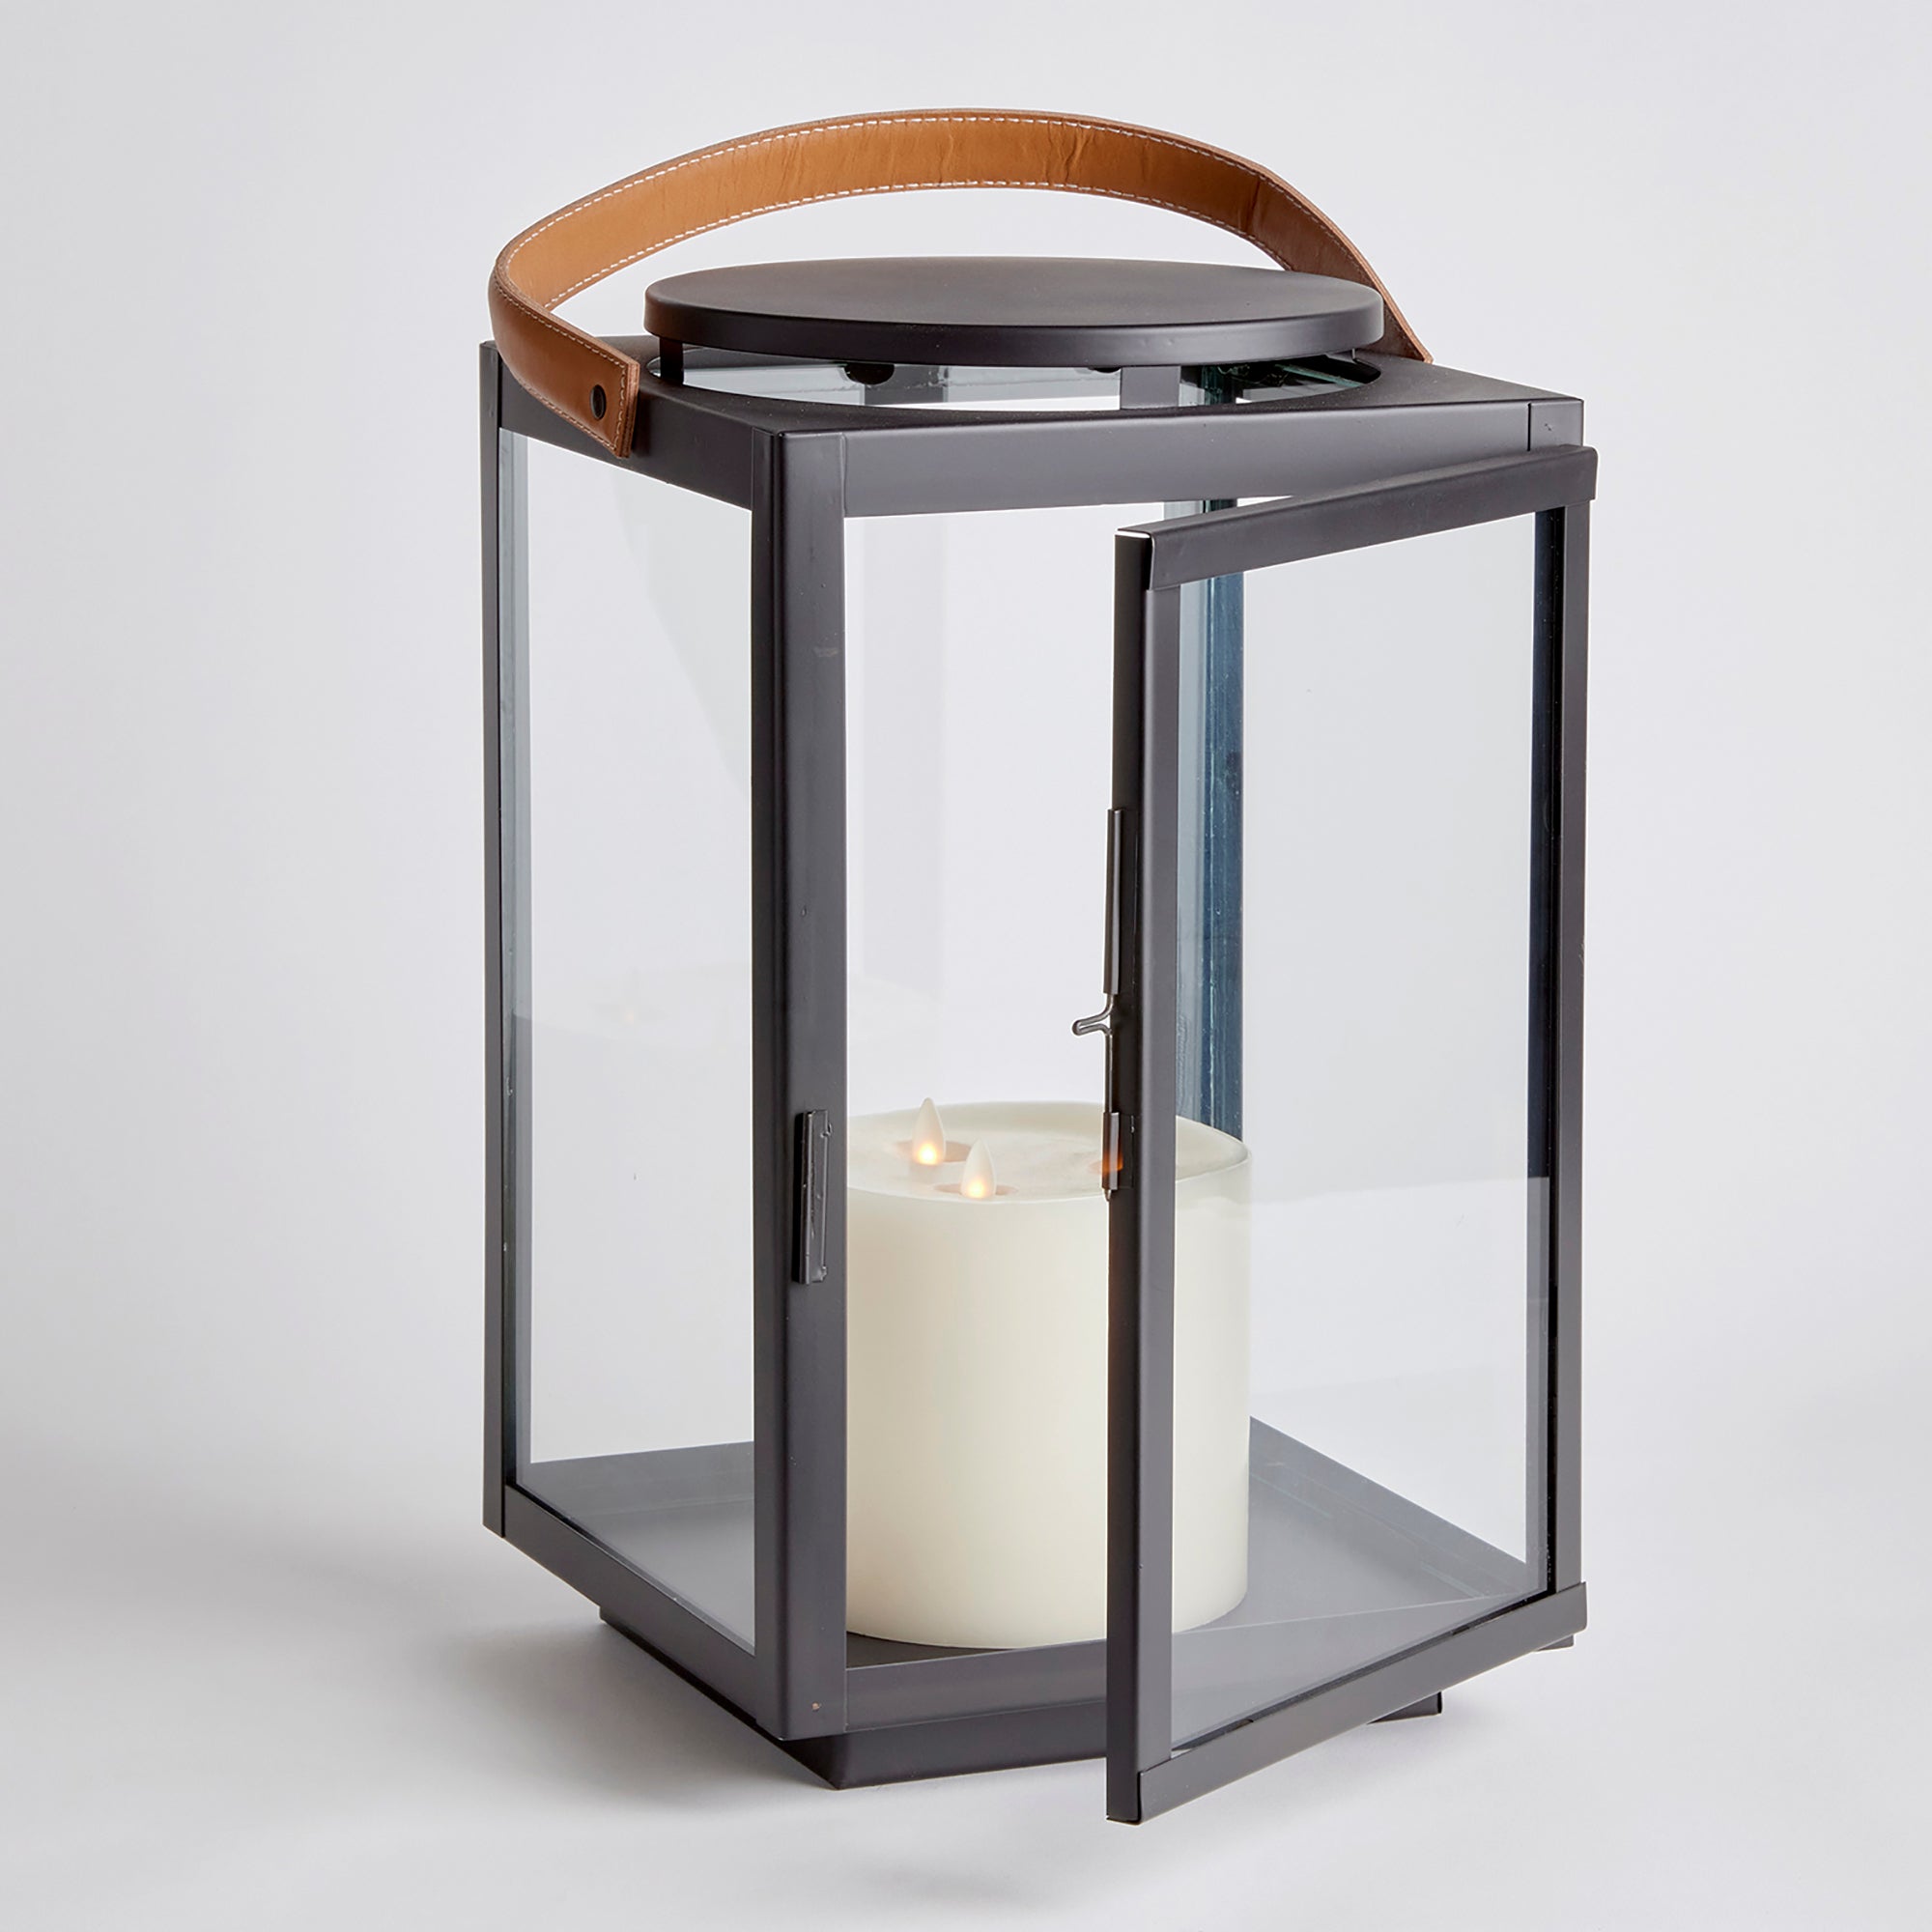 Featuring a real leather handle with tailored stitching, this well-scaled lantern is a mix of traditional and modern aesthetics. A beautiful accent for entryway, living room or study. Amethyst Home provides interior design, new construction, custom furniture, and area rugs in the San Diego metro area.